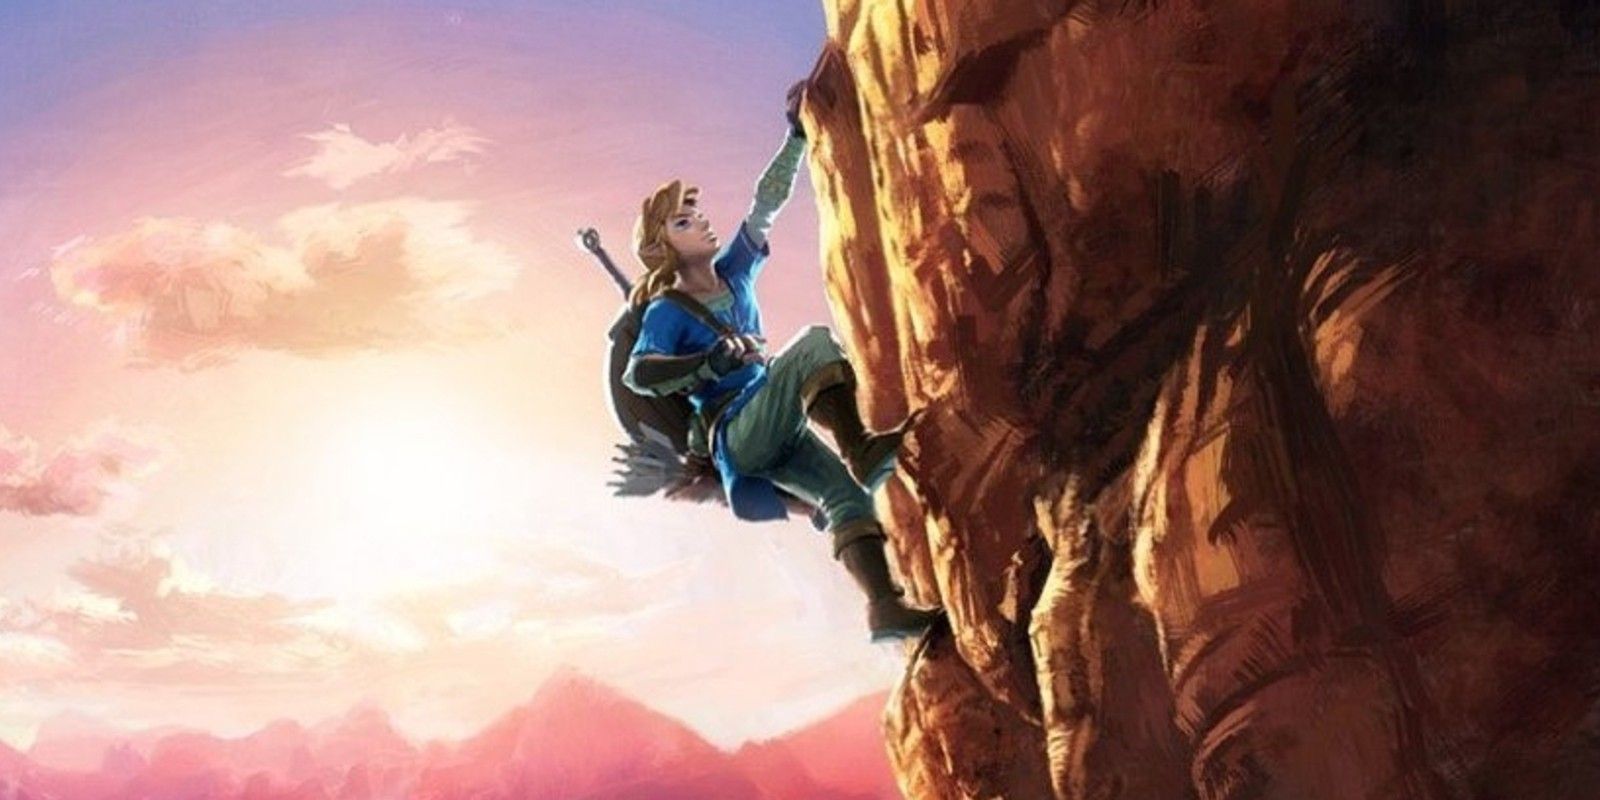 Link climbing a cliff in a The Legend of Zelda: Breath of the Wild promo image.